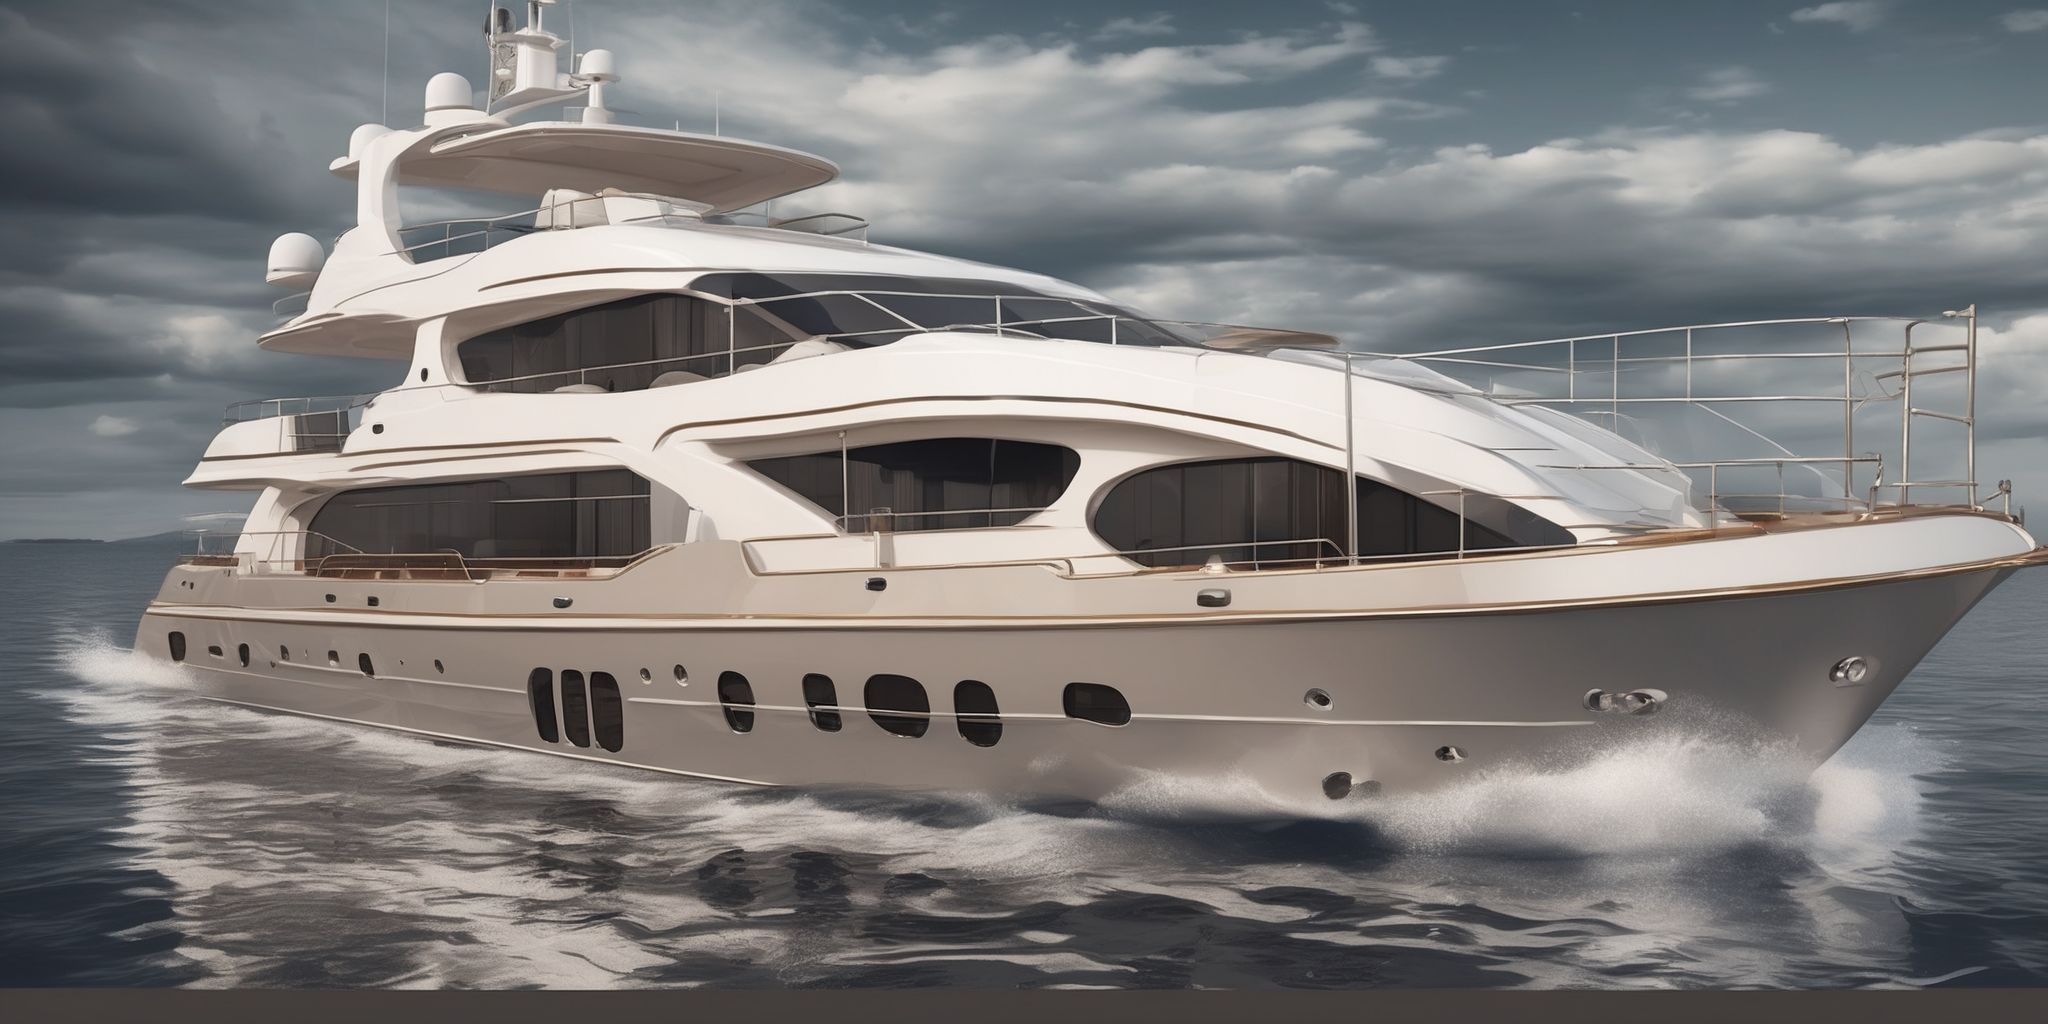 Luxury yacht  in realistic, photographic style